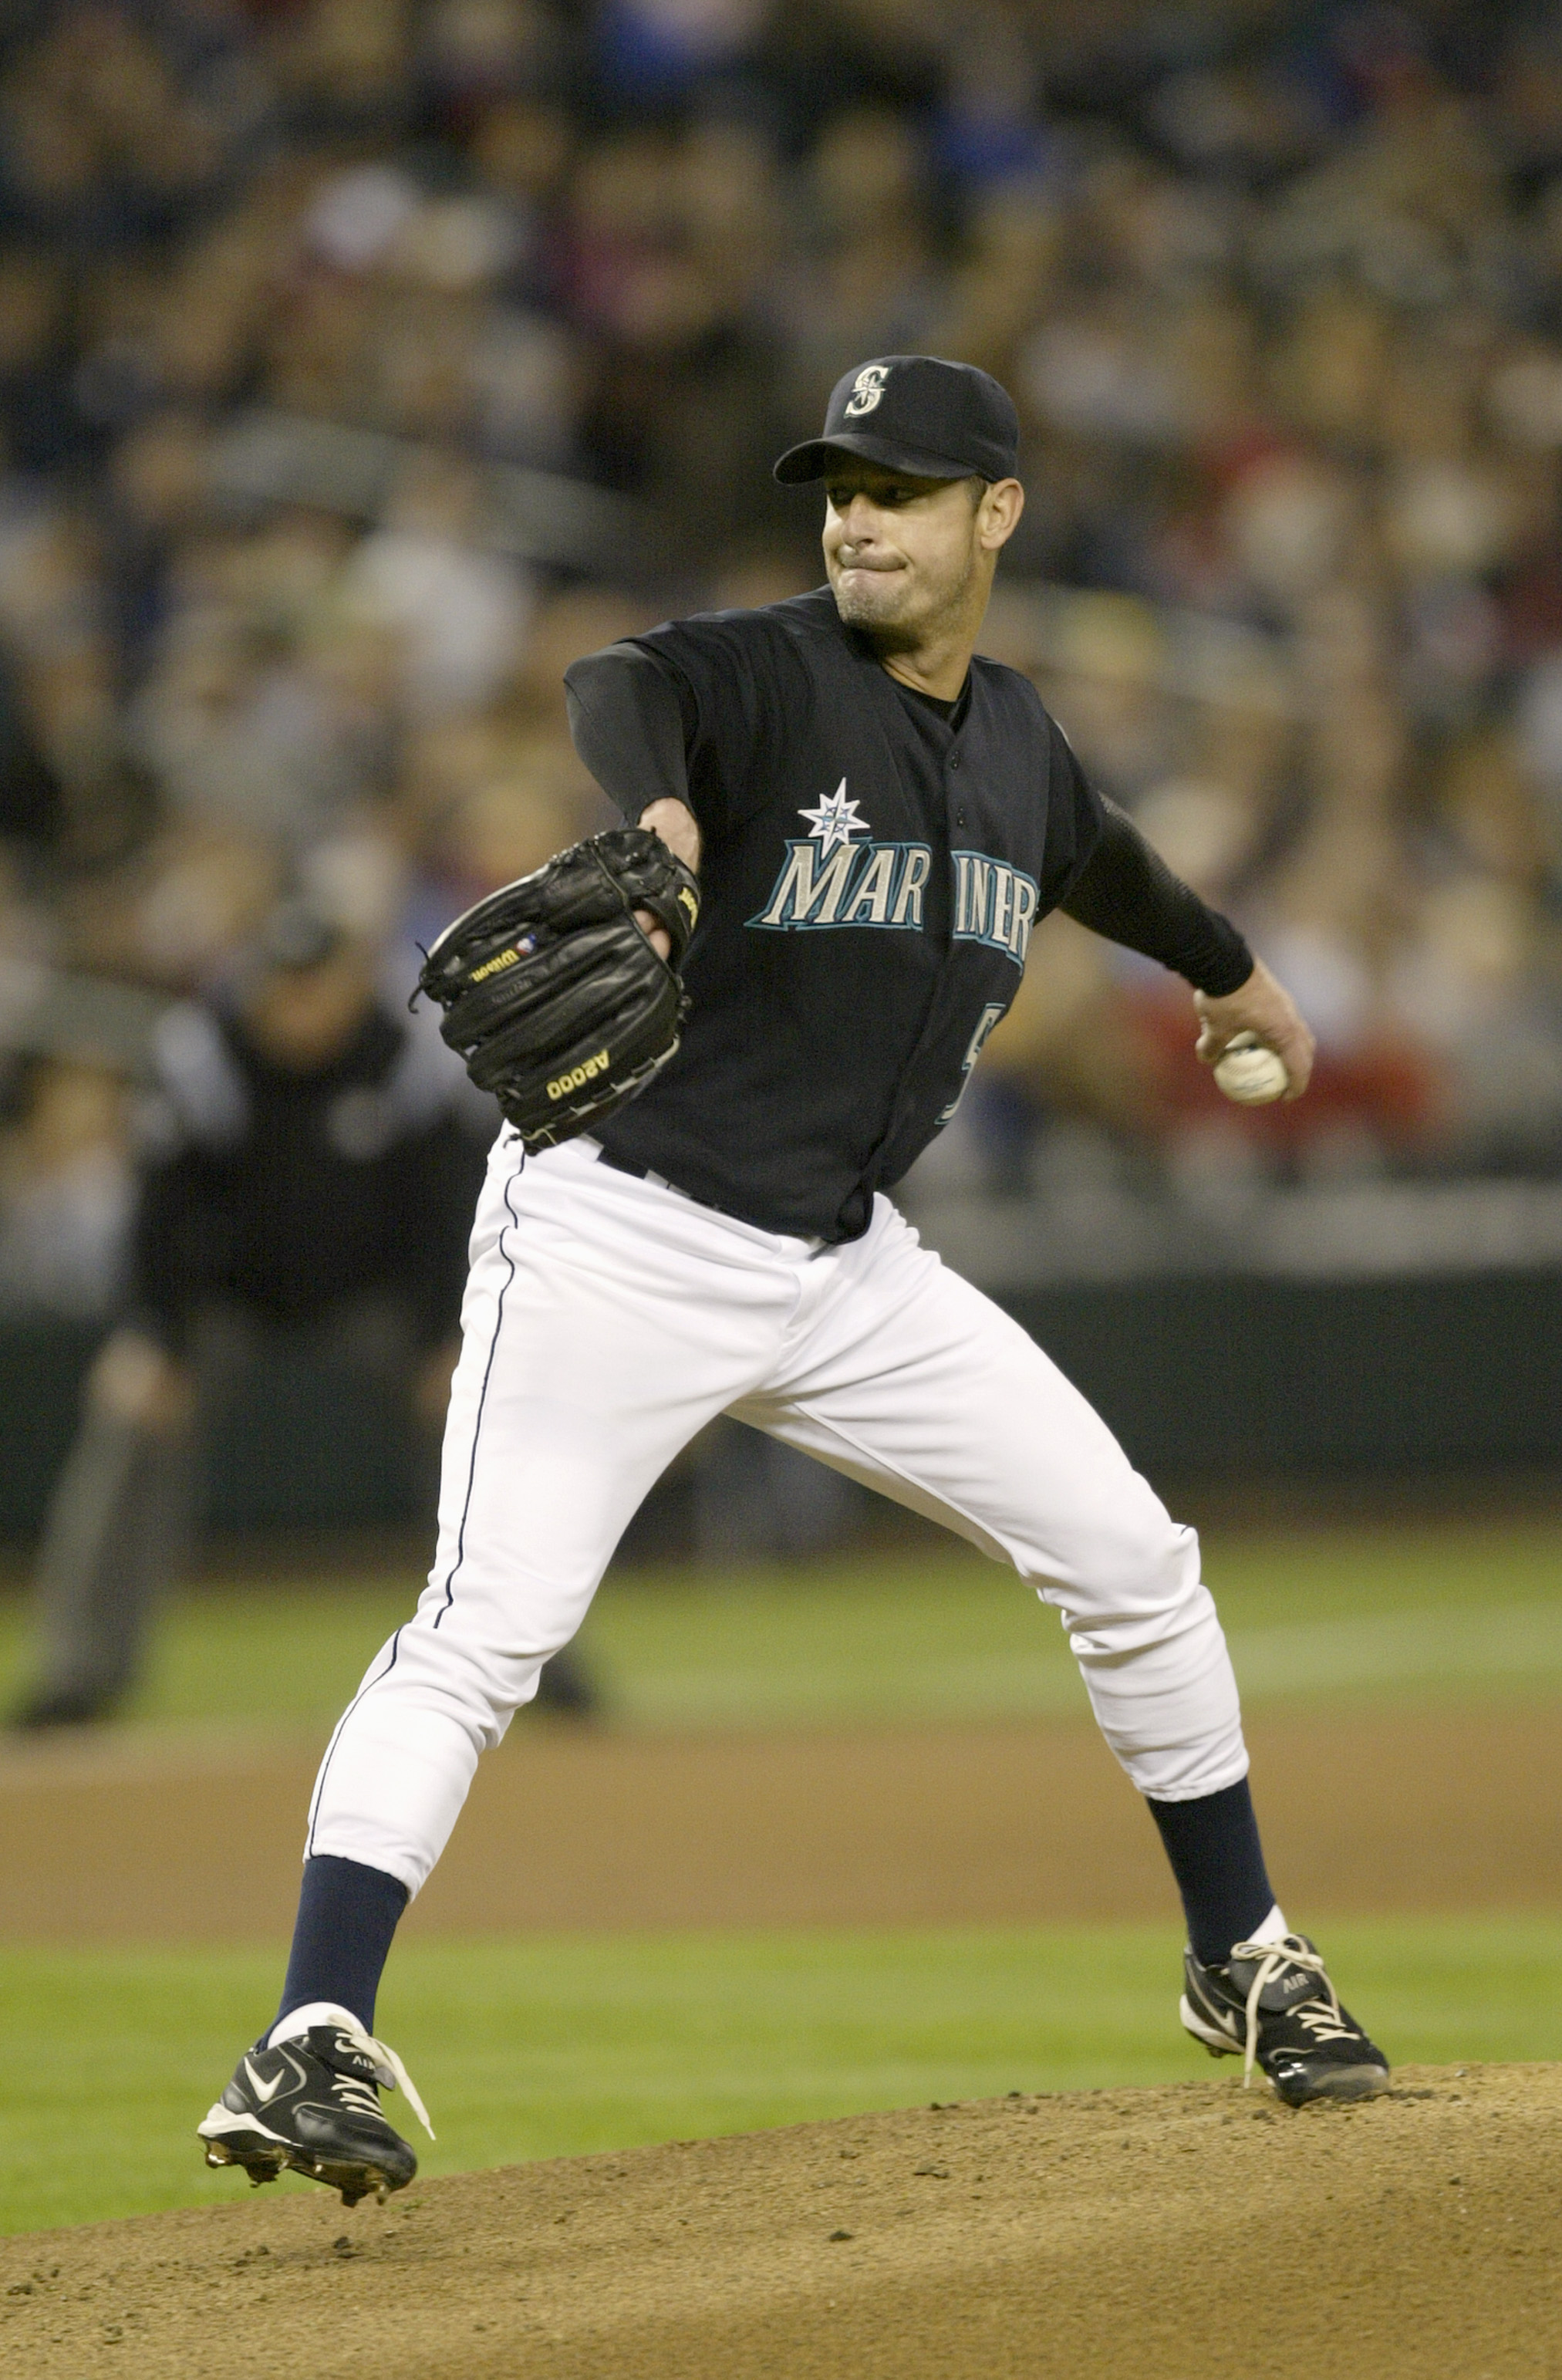 SEATTLE - SEPTEMBER 30:  Starting pitcher Jamie Moyer #50 of the Seattle Mariners winds back to pitch during a game against the Oakland Athletics on September 30 2005 at Safeco Field in Seattle Washington. The Mariners won 4-1. (Photo by Otto Greule Jr/Ge